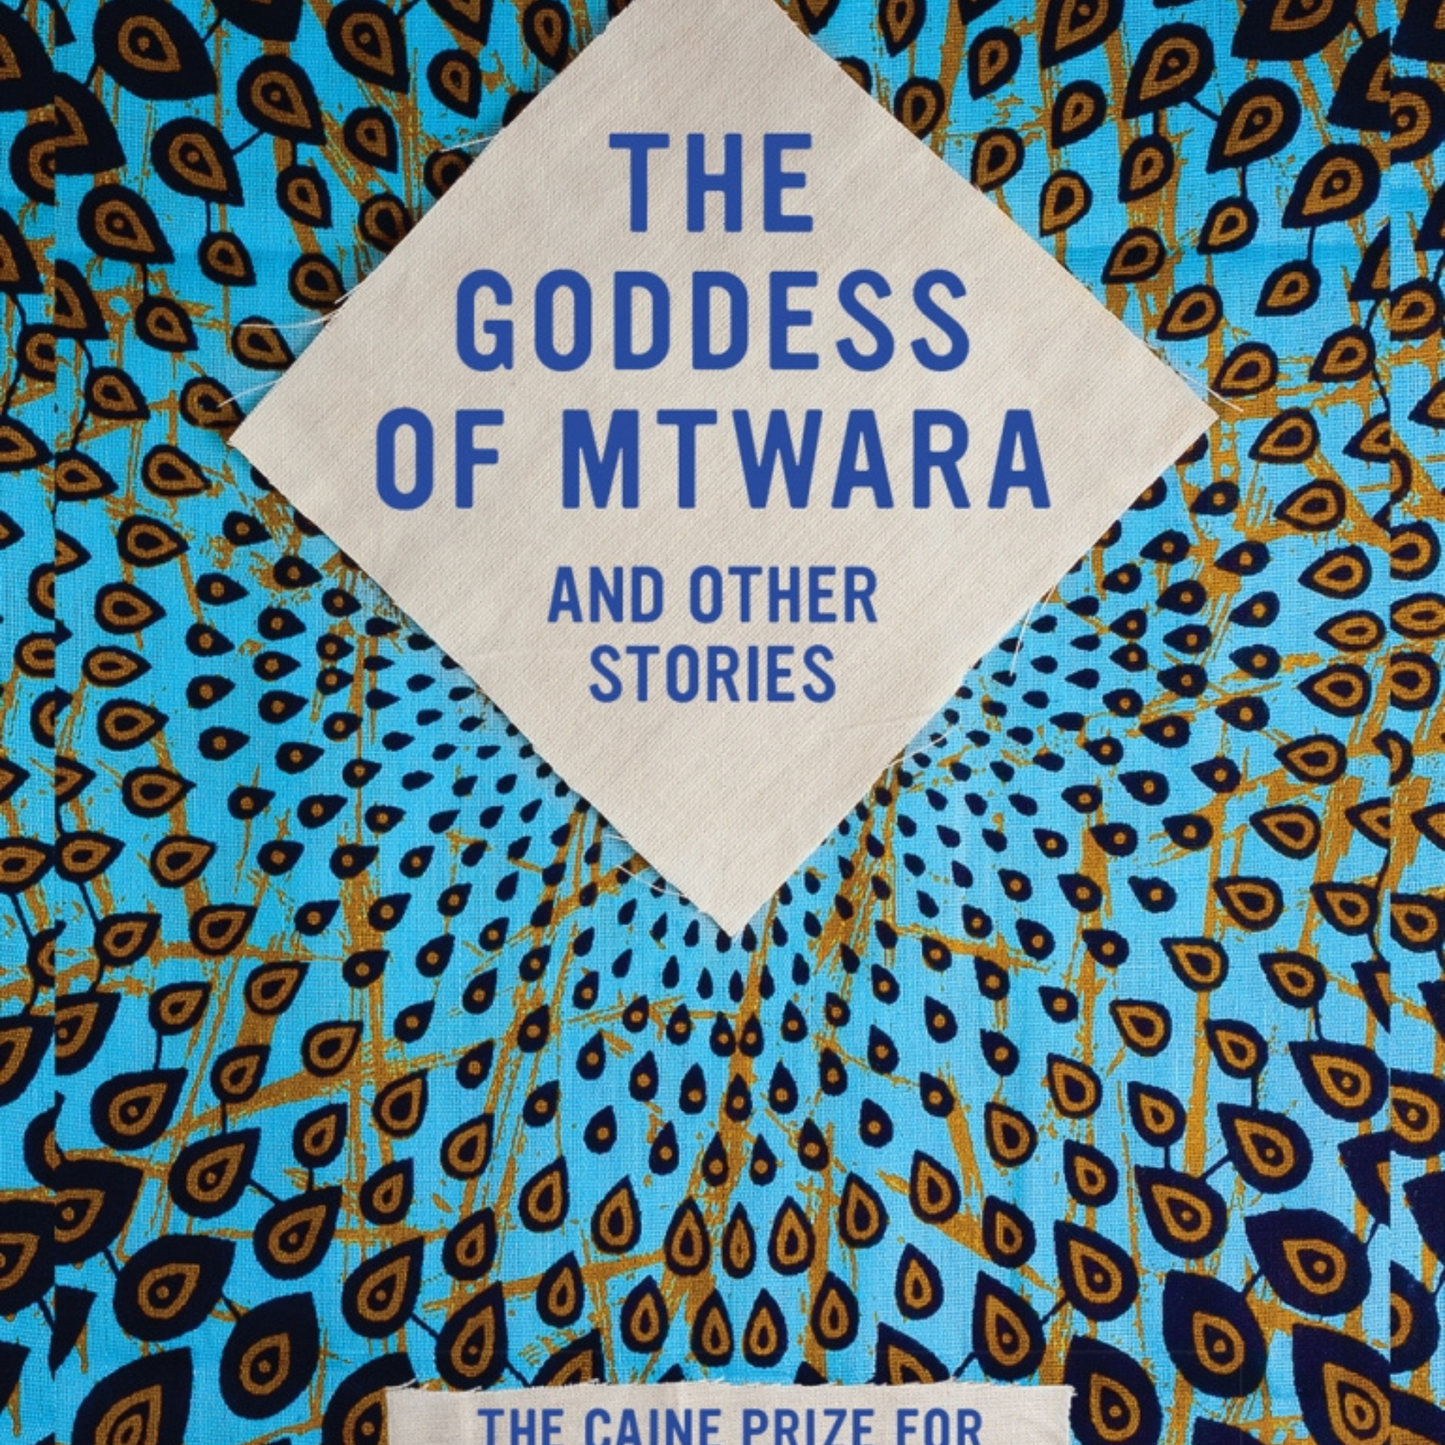 The Goddess of Mtwara and Other Stories